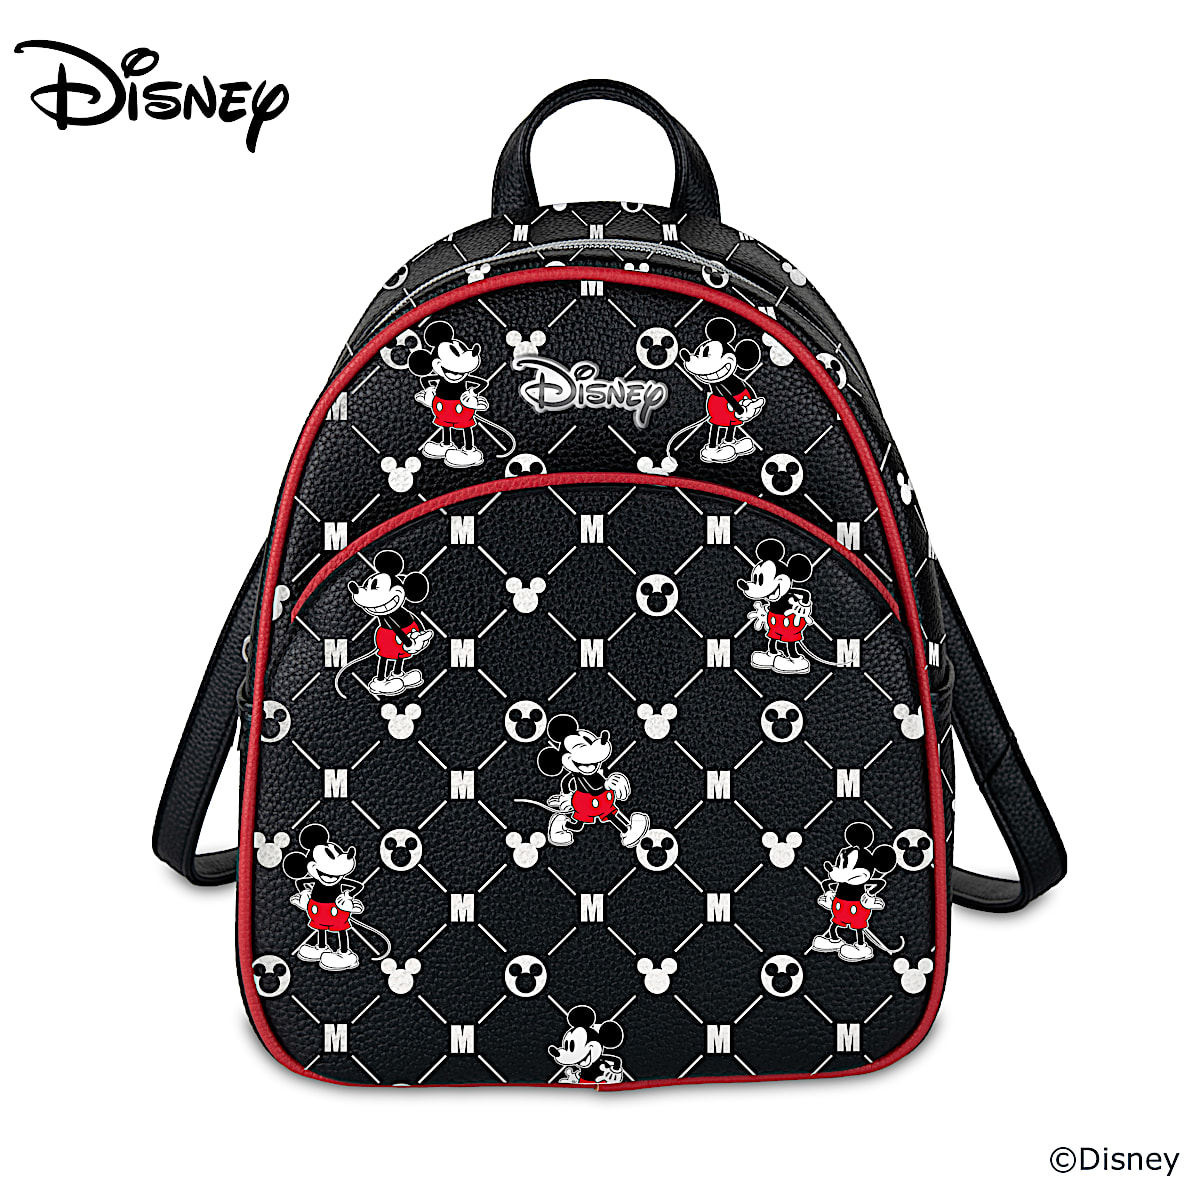 Black Faux Leather Backpack Featuring An All-Over Disneys Mickey Mouse ...